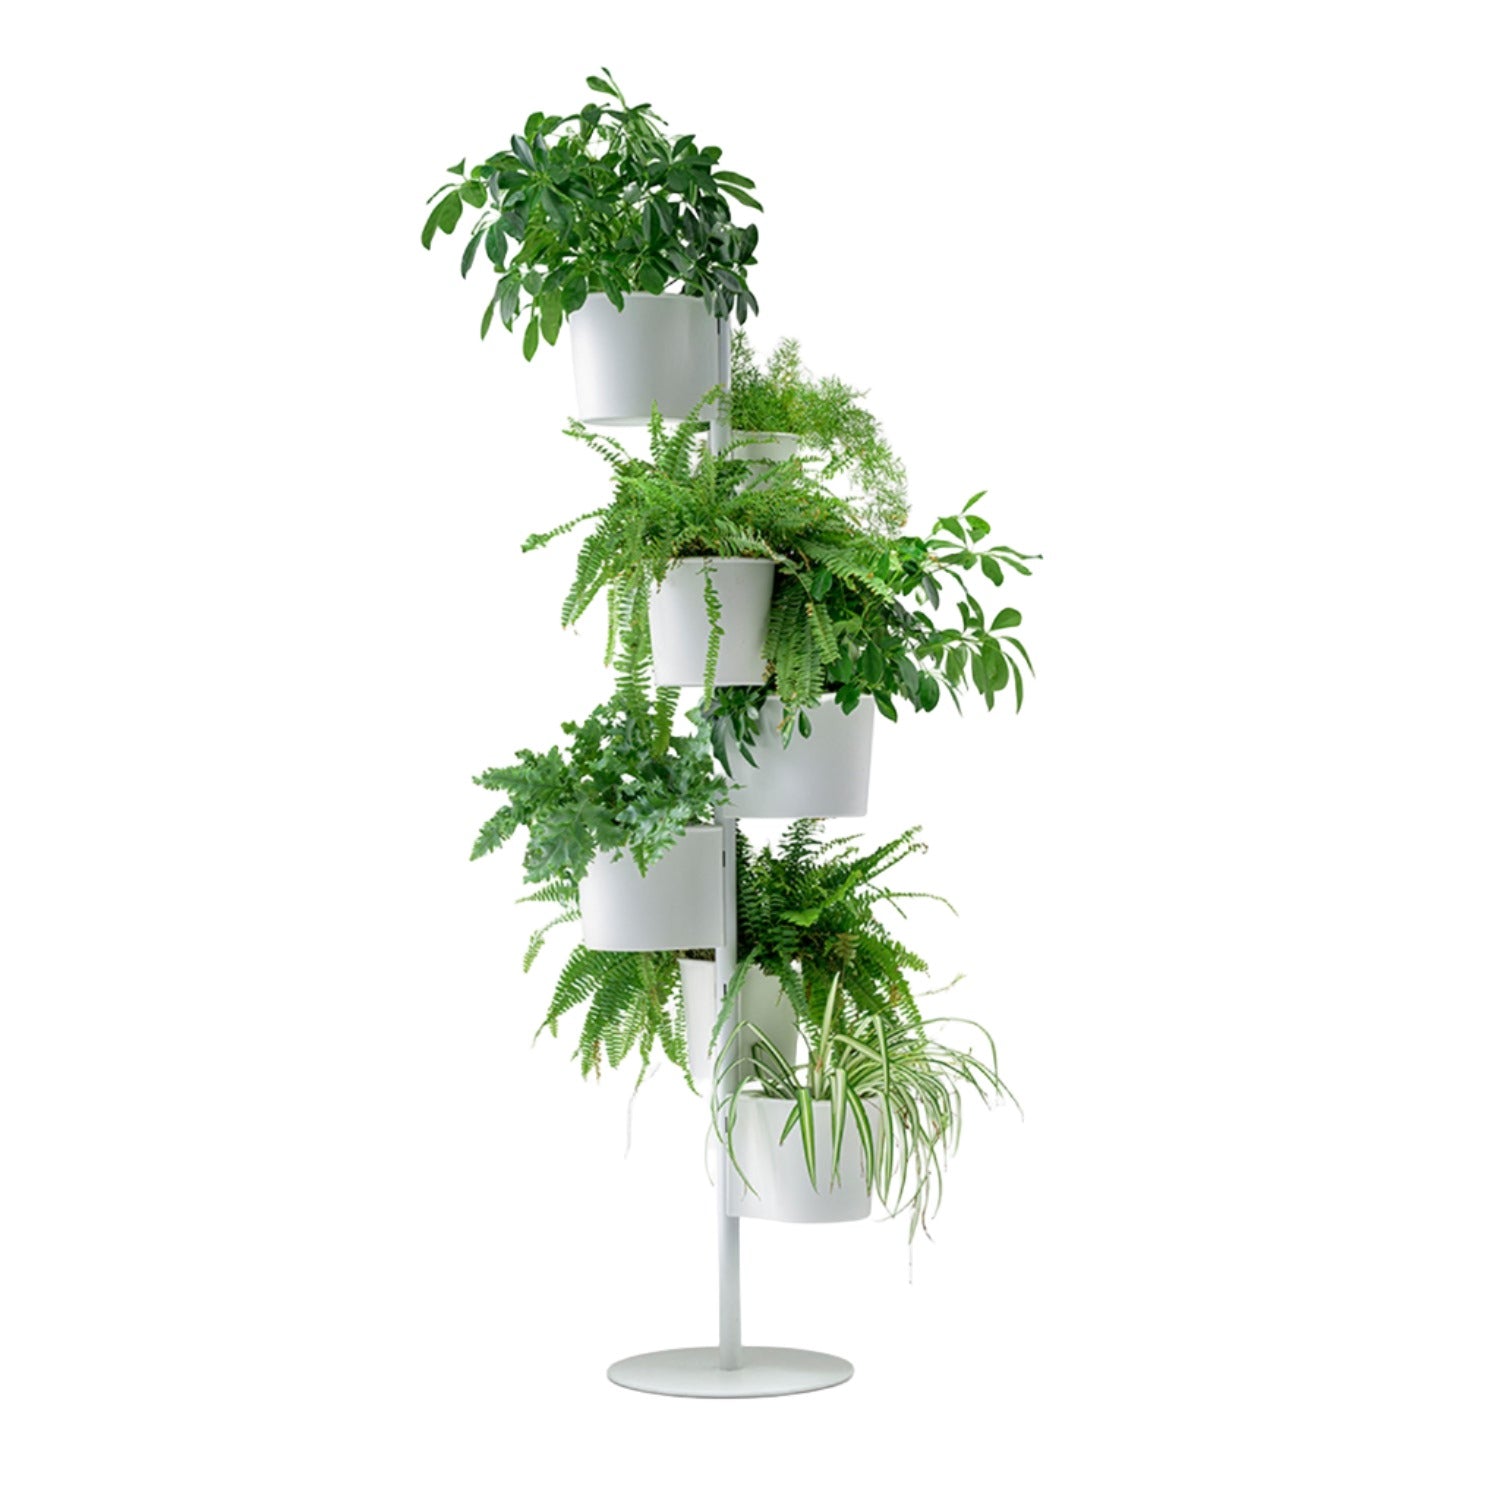 Pedrali Hevea plant stand in white with plants